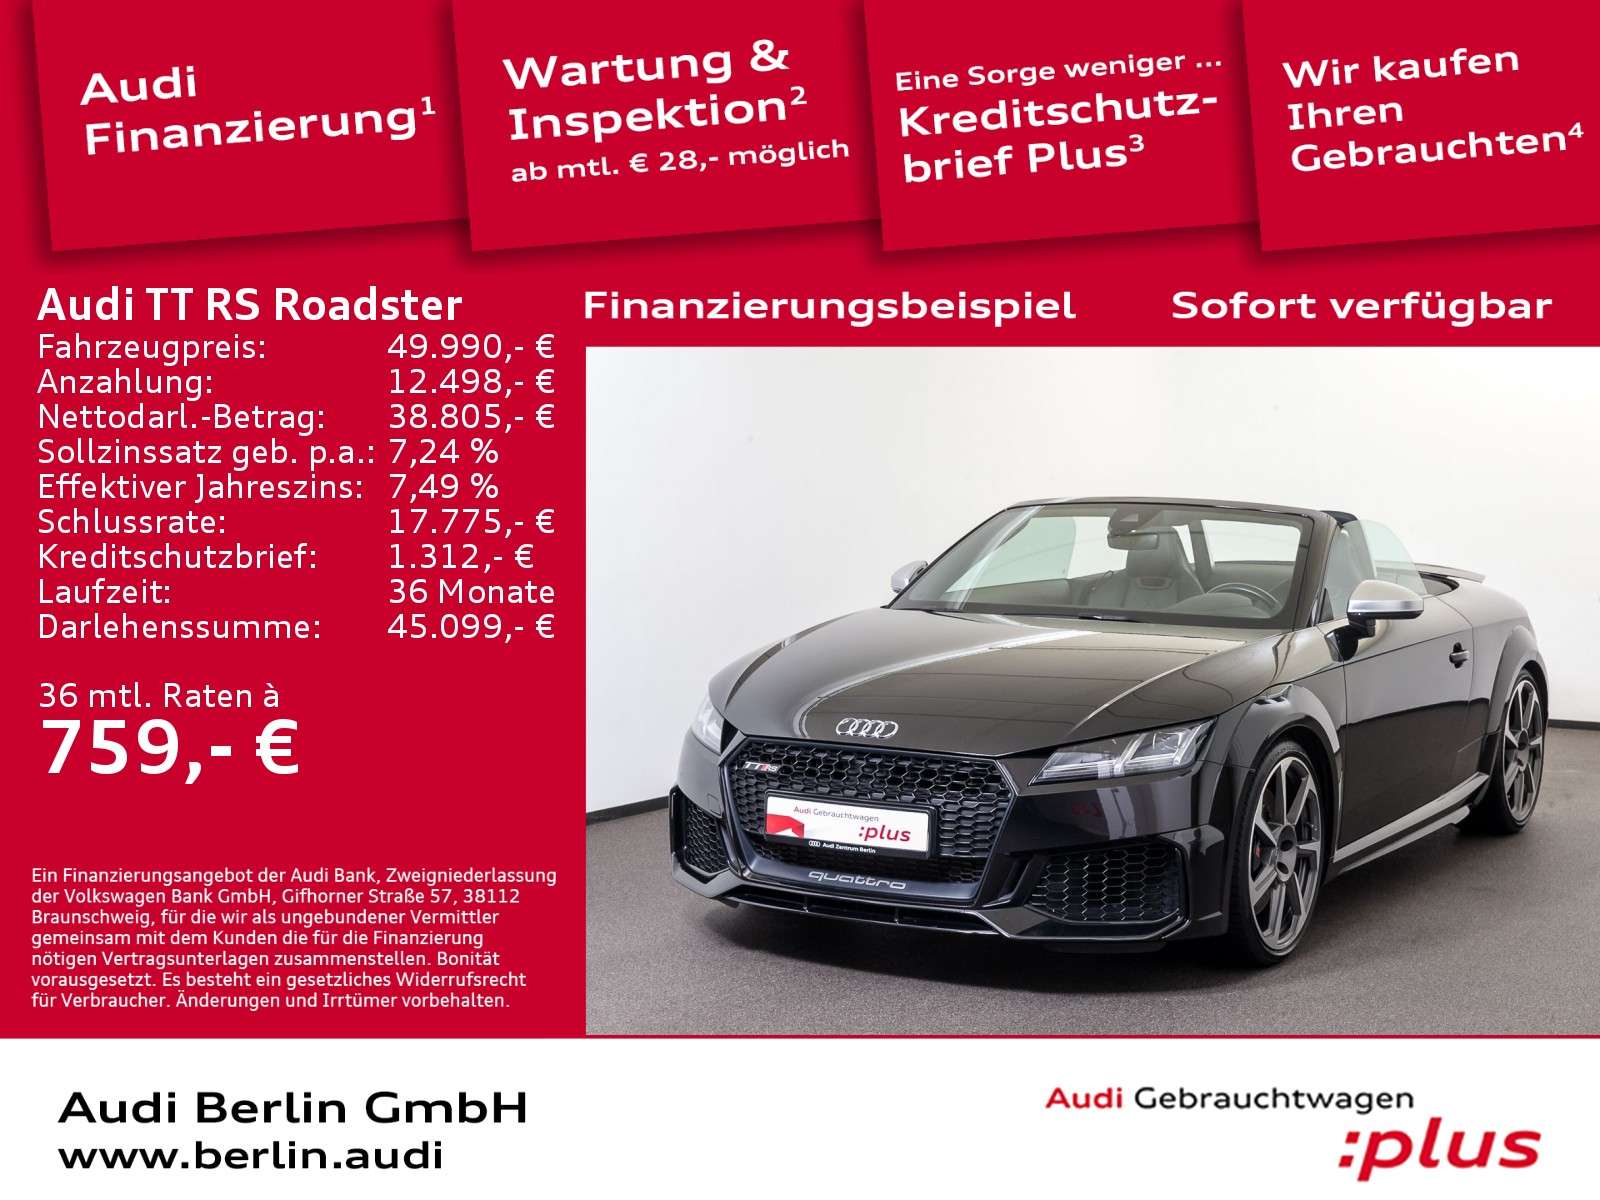 Audi TT RS Convertible in Black used in Berlin for € 49,990.-